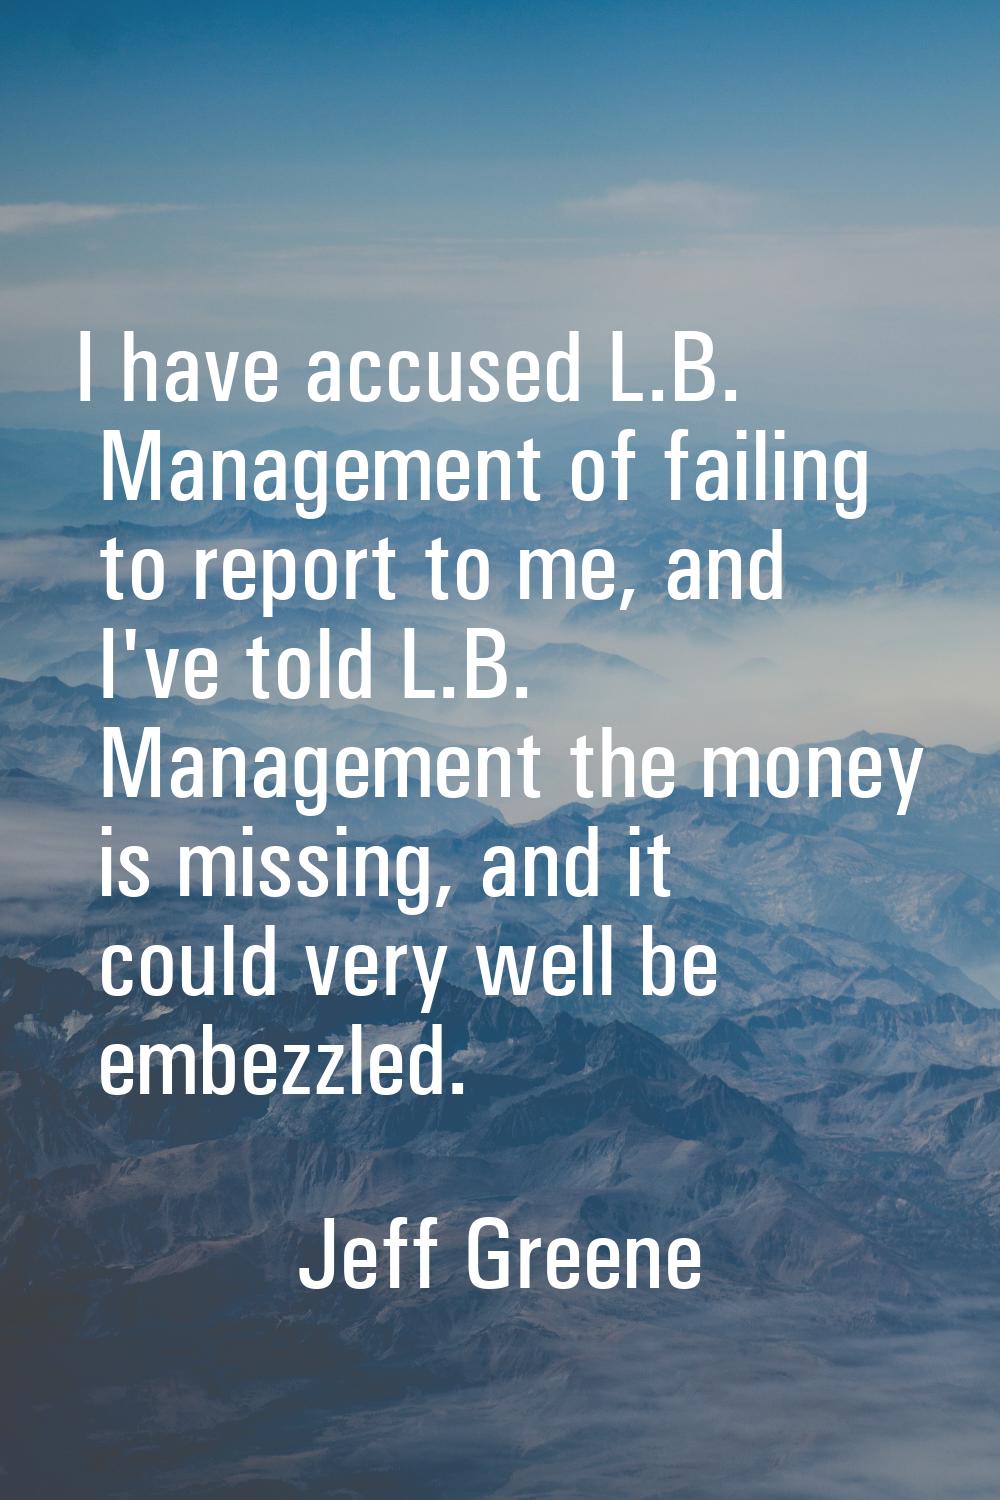 I have accused L.B. Management of failing to report to me, and I've told L.B. Management the money 